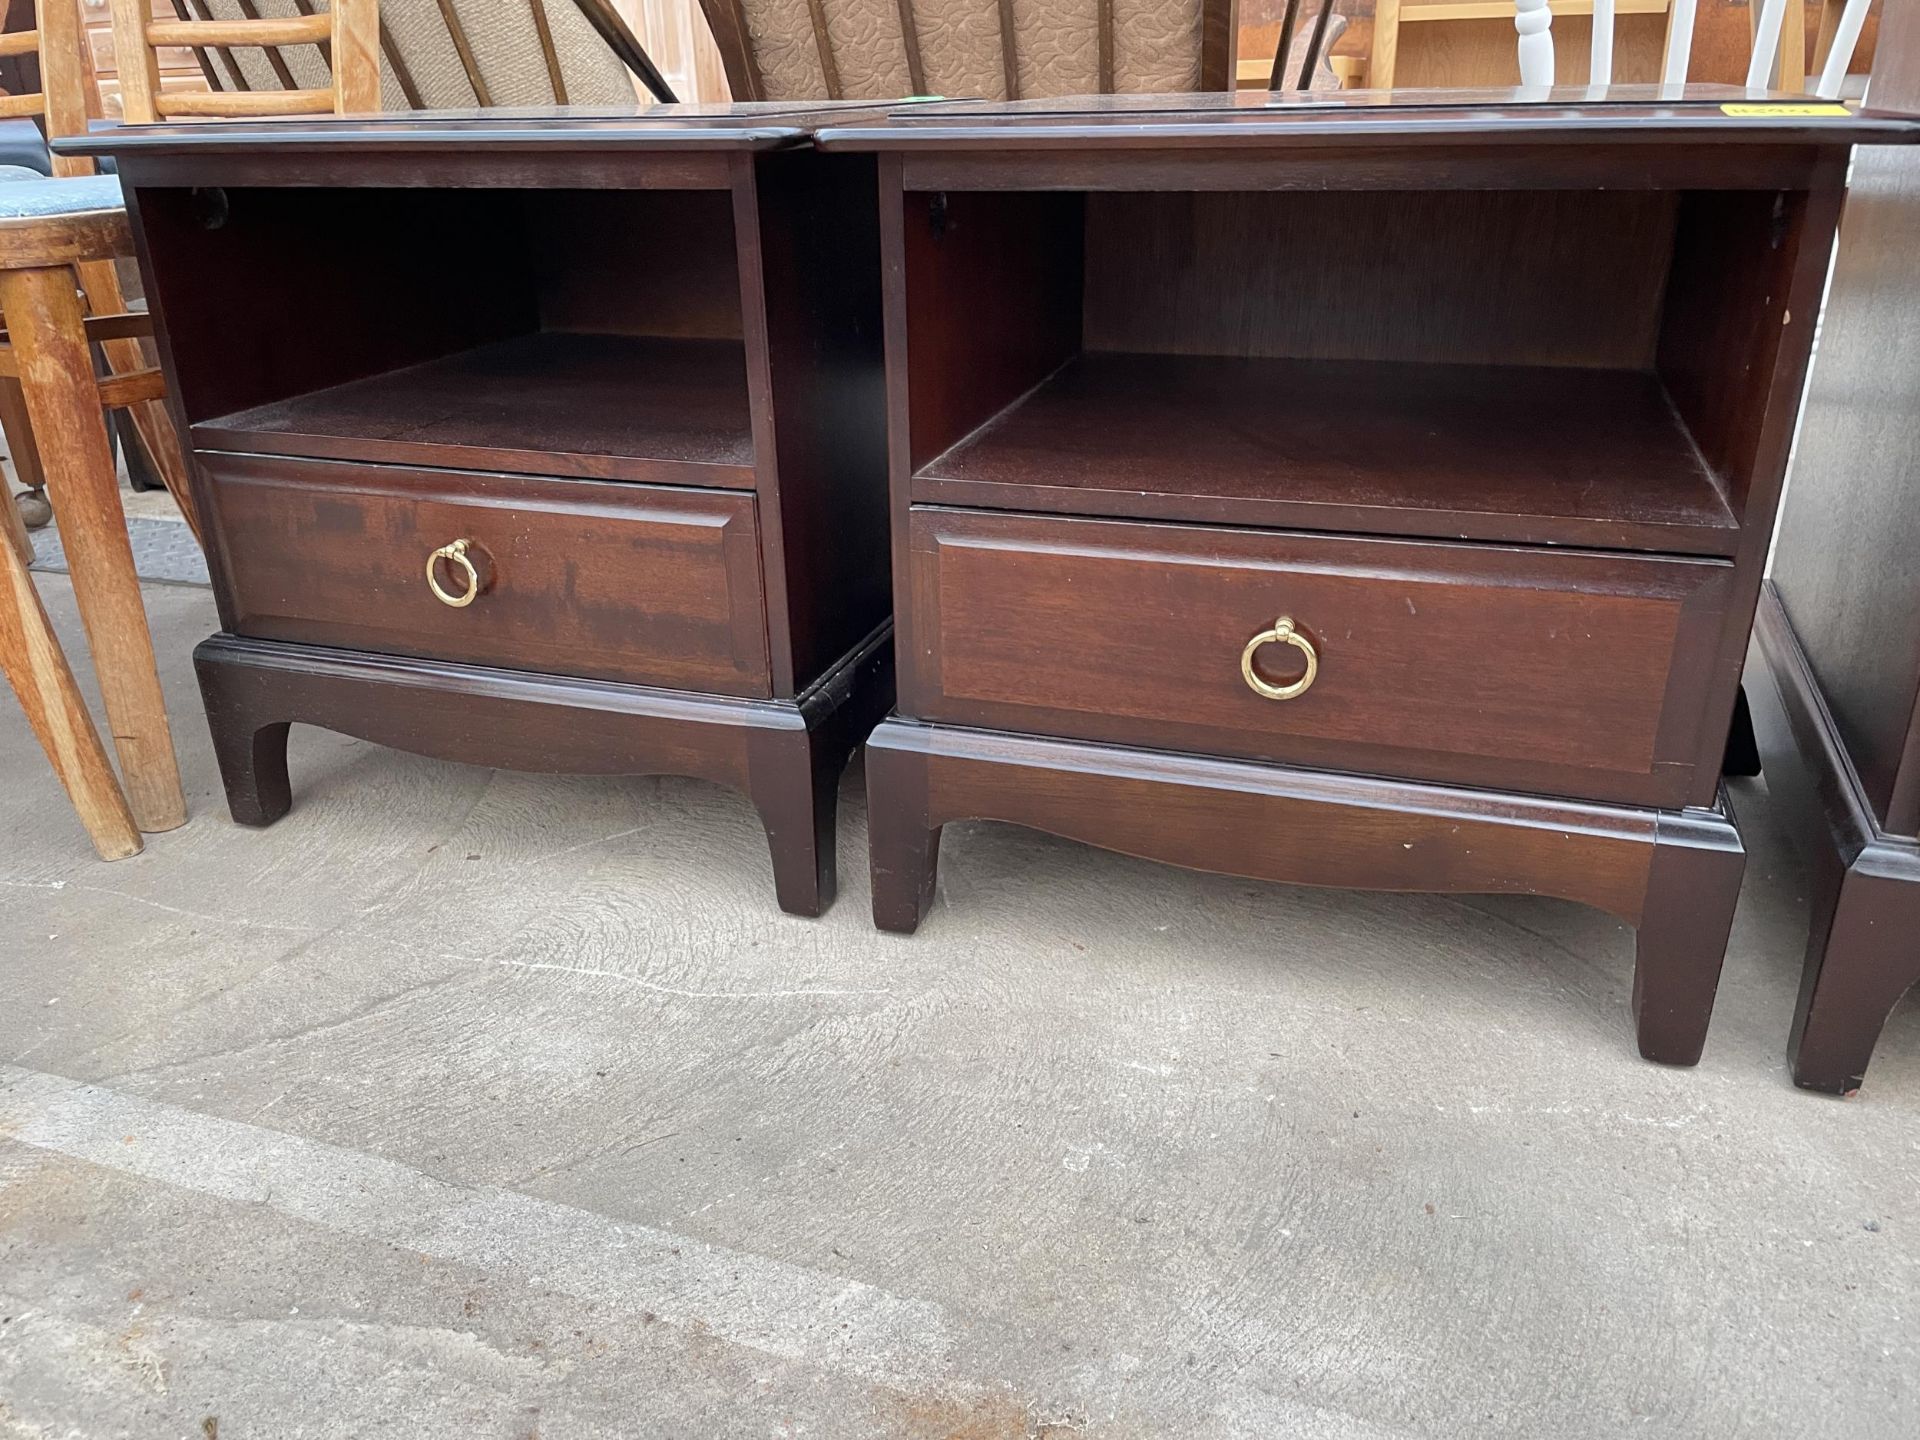 A PAIR OF STAG MINSTREL BEDSIDE TABLES - Image 2 of 2